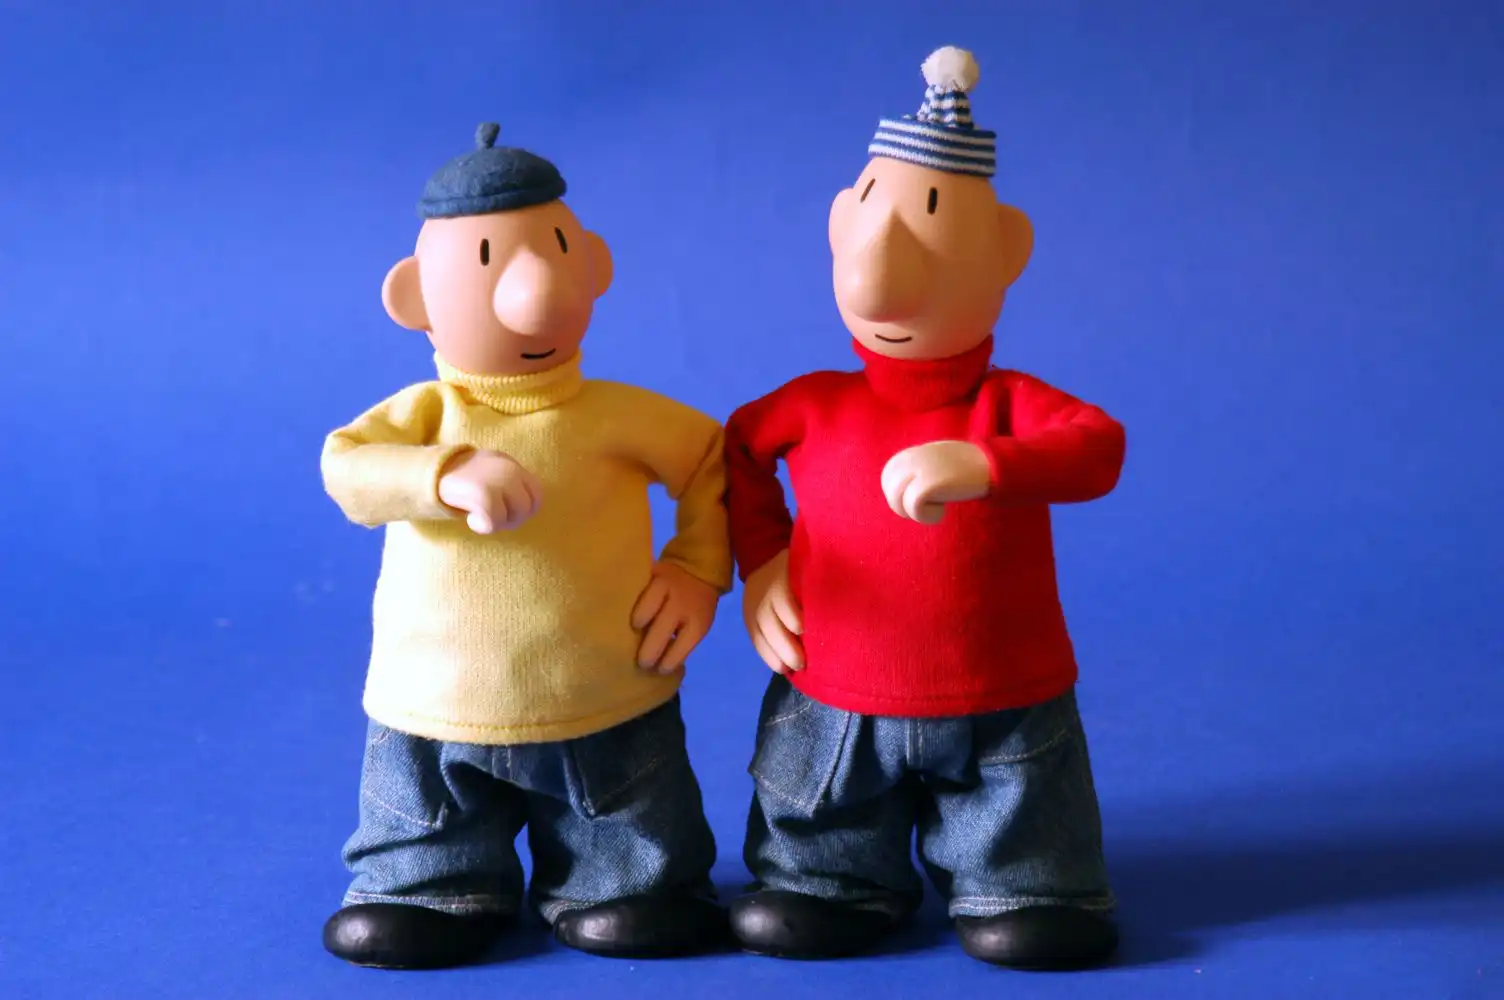 An image of Pat and Mat, a characters from Check cartoon. They represent developers which just get the job done.